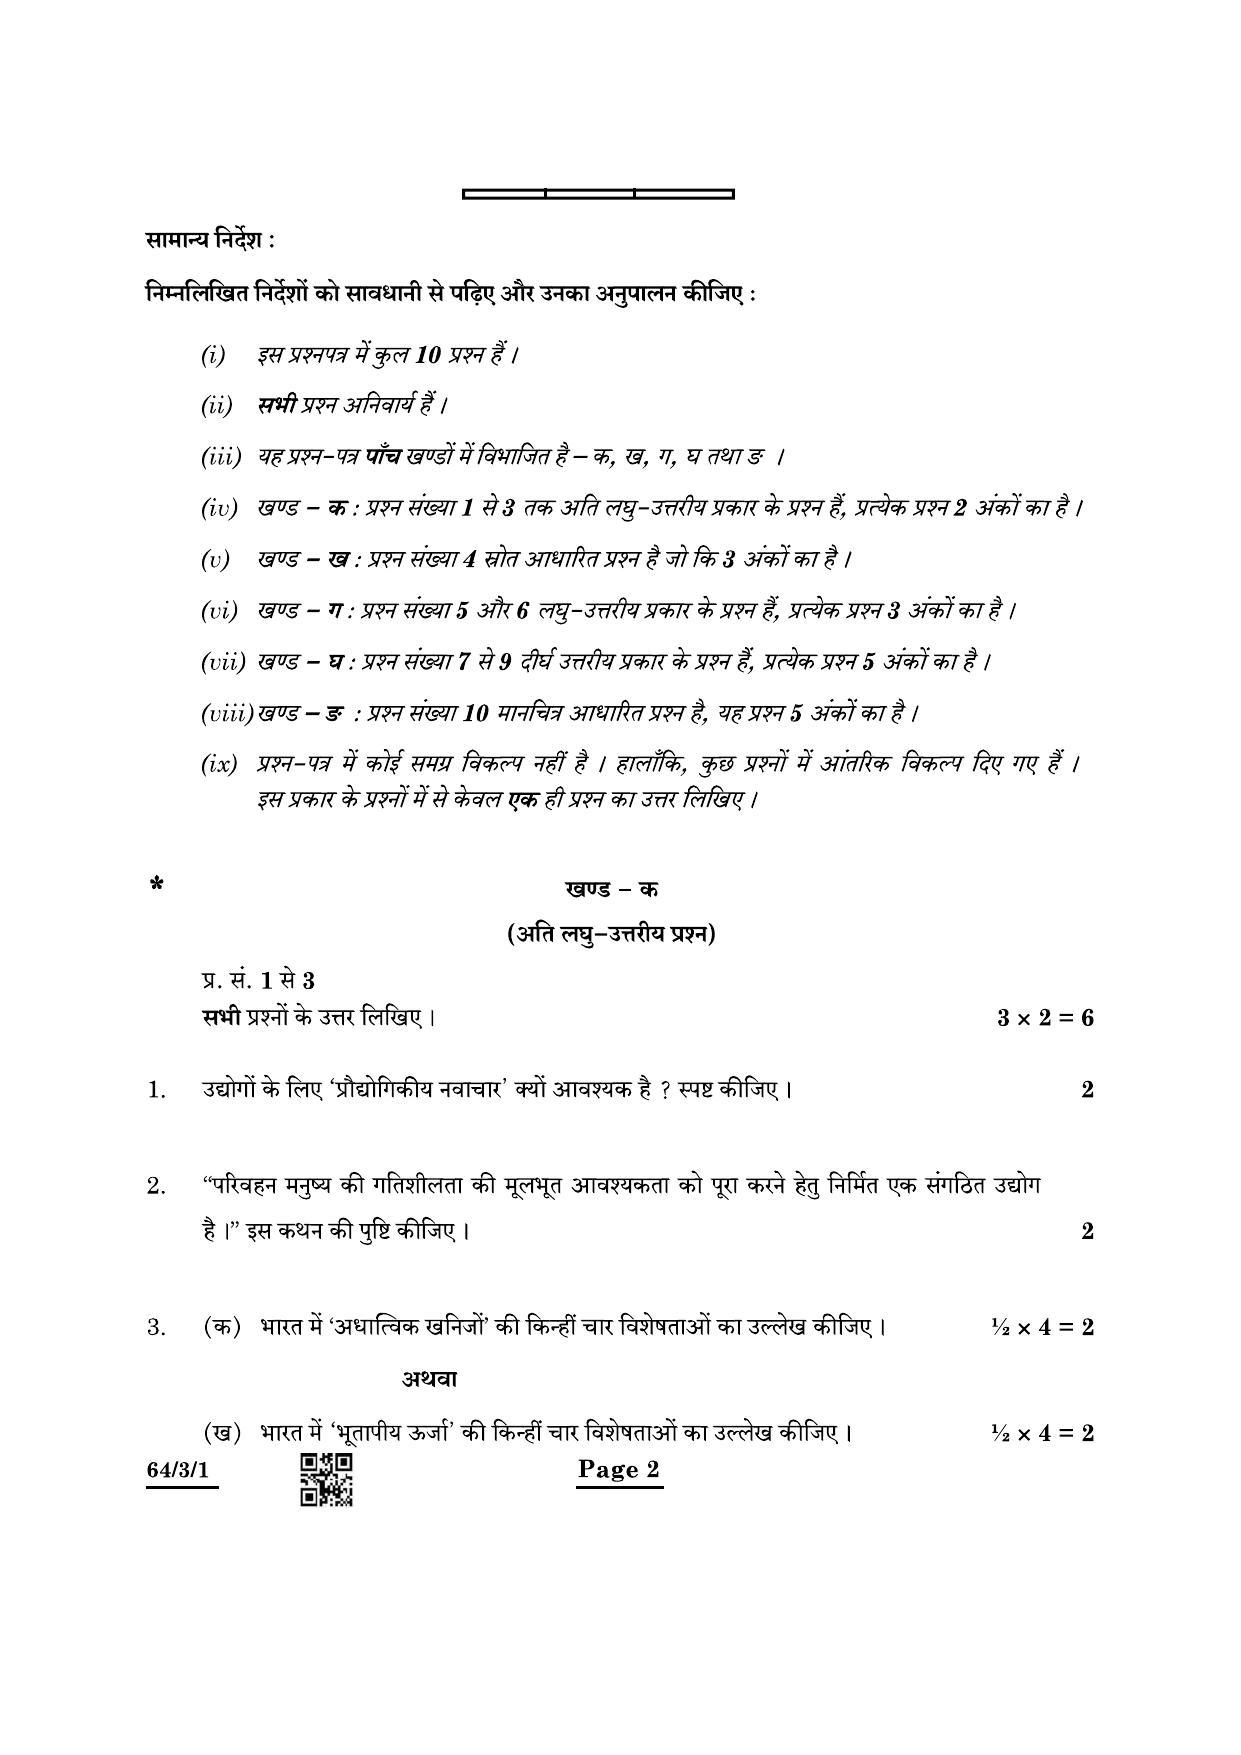 CBSE Class 12 64-3-1 Geography 2022 Question Paper - Page 2